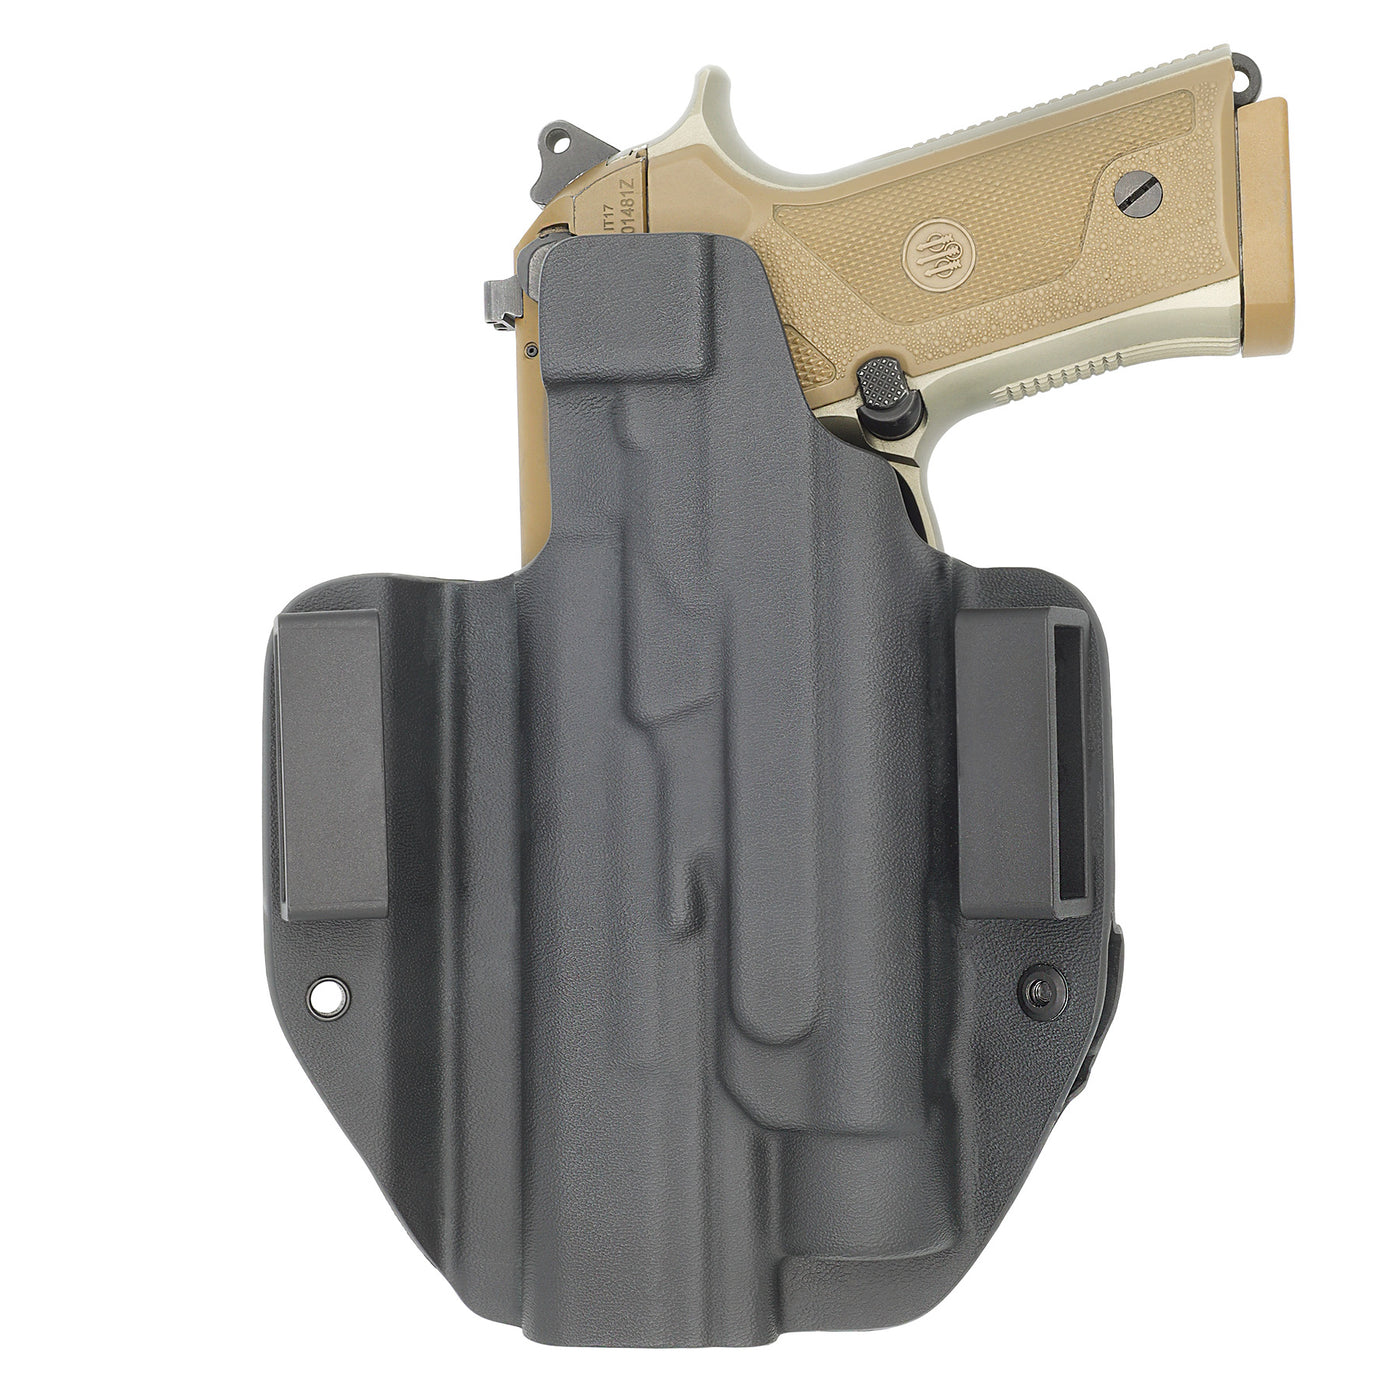 C&G Holsters Quickship OWB Tactical Beretta TLR1 in holstered position back view